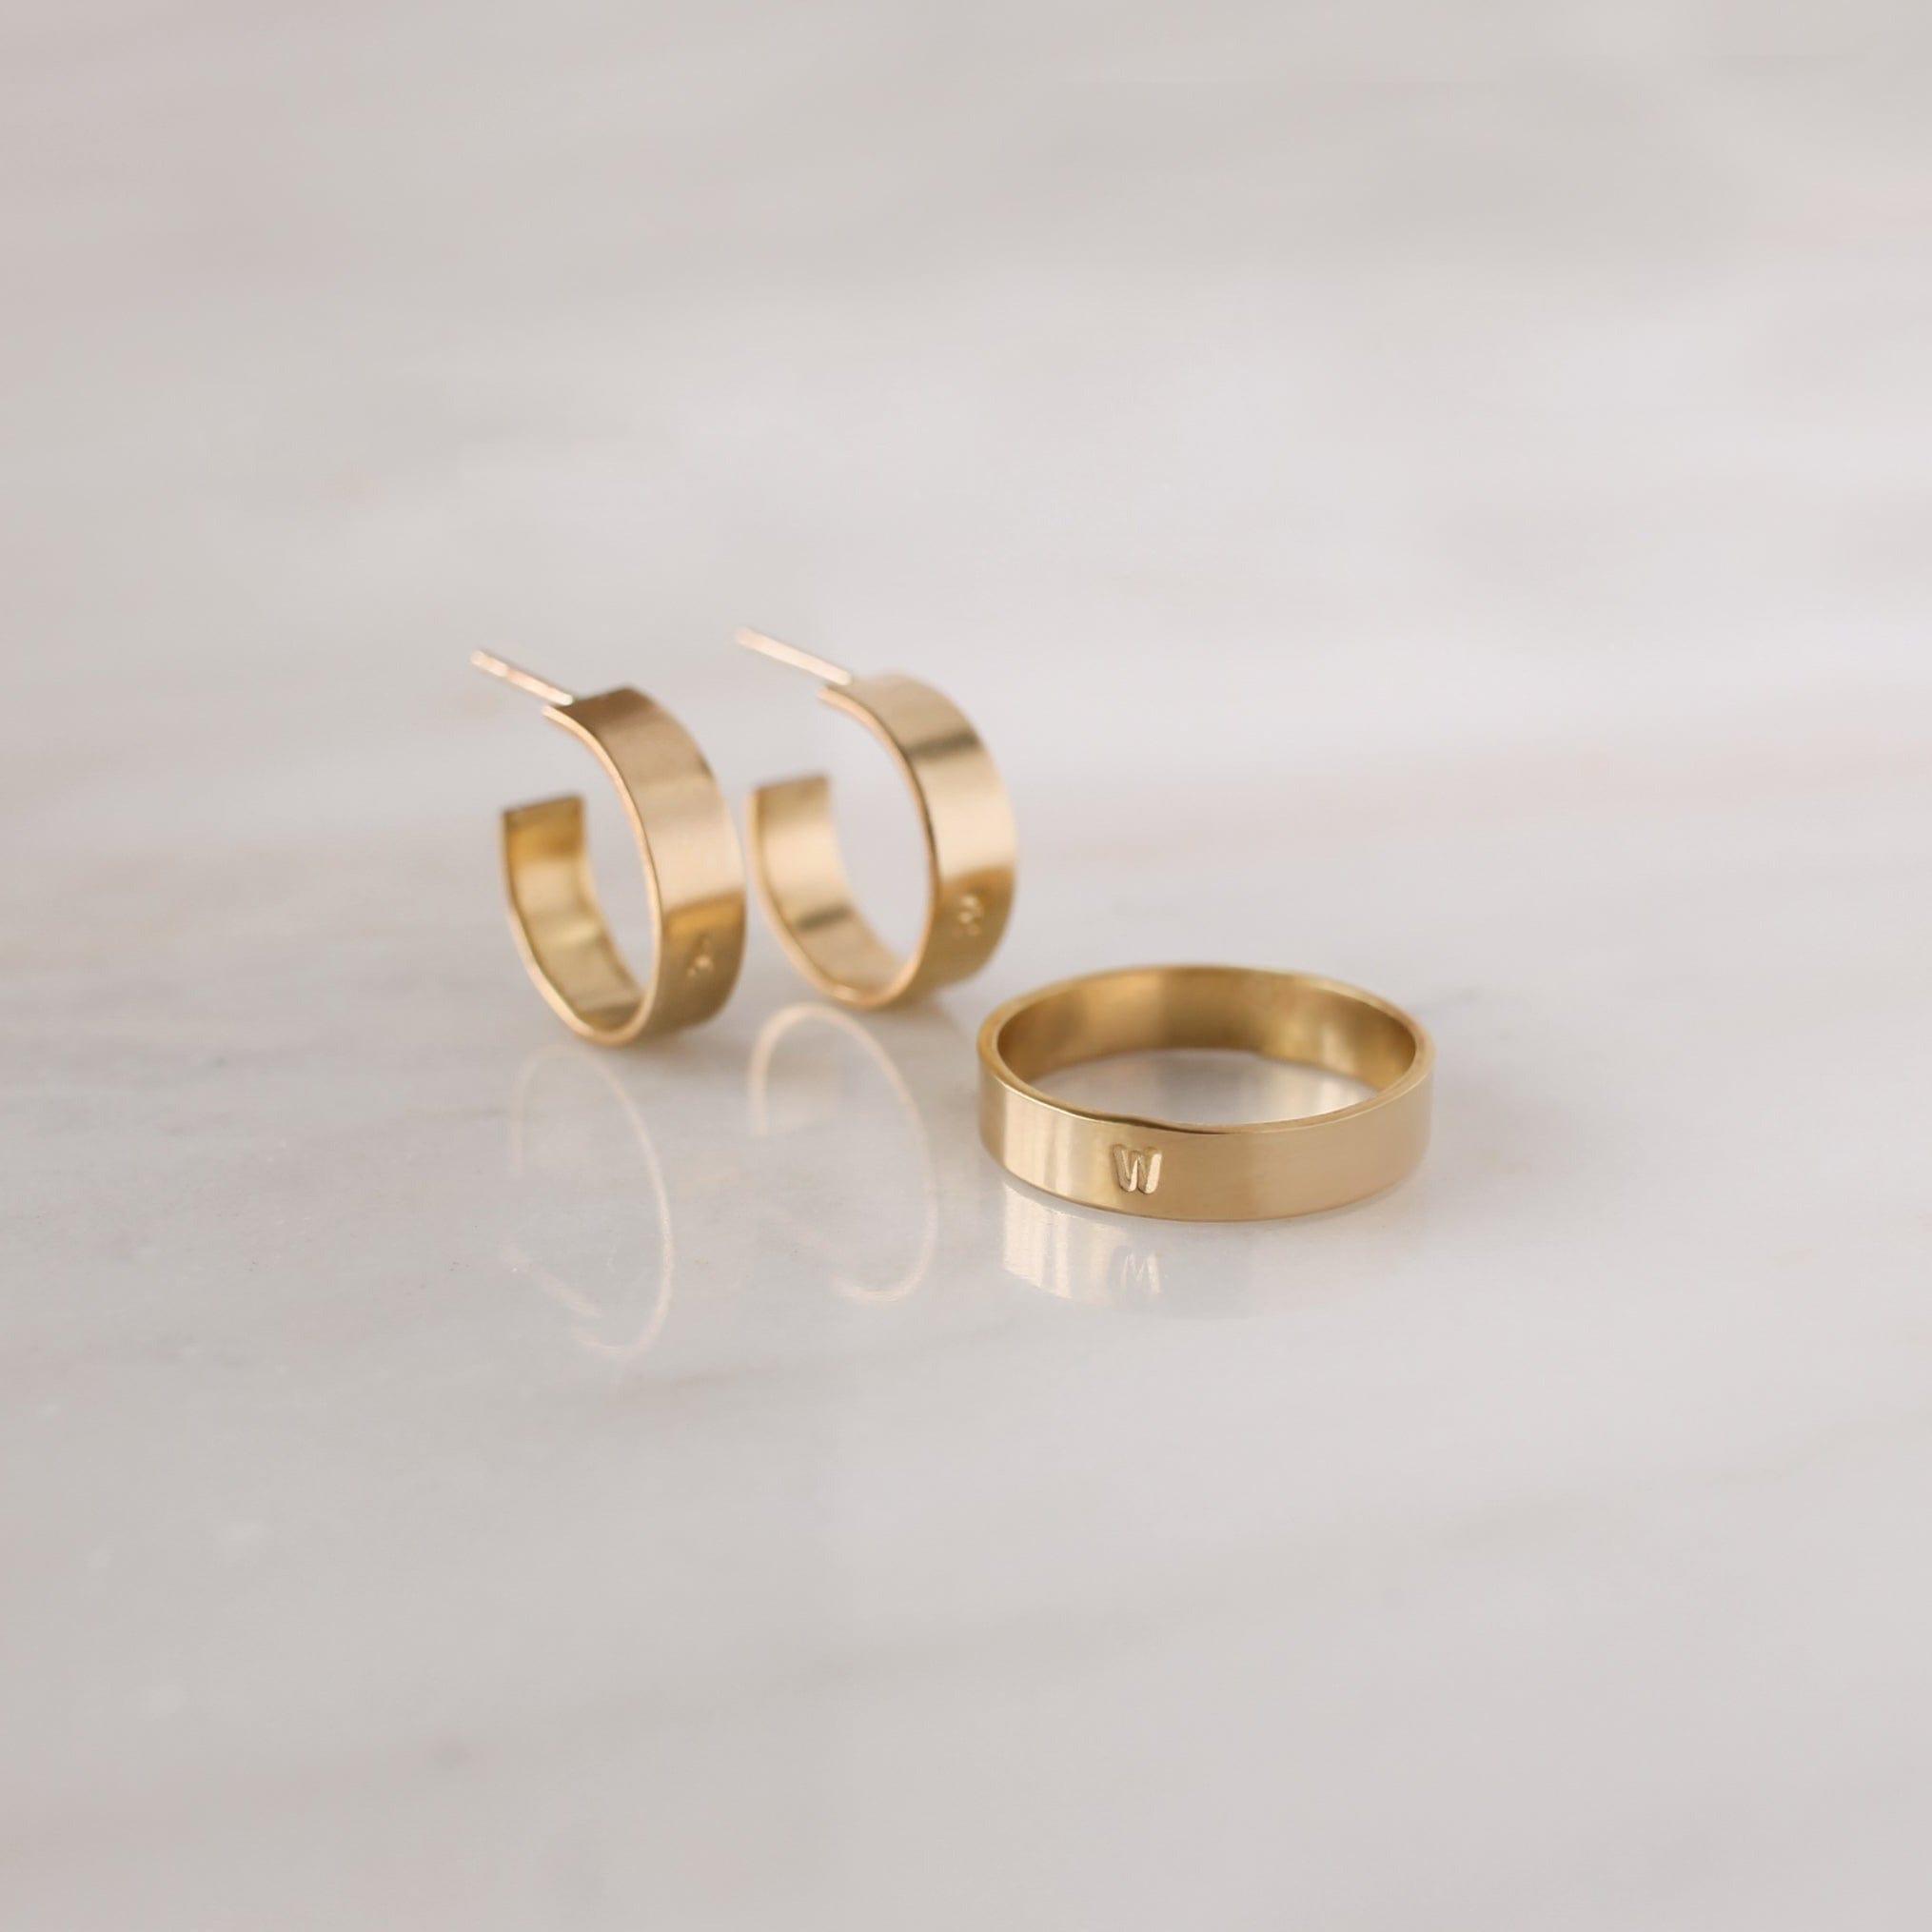 Maude Ring - Nolia Jewelry - Meaningful + Sustainably Handcrafted Jewelry